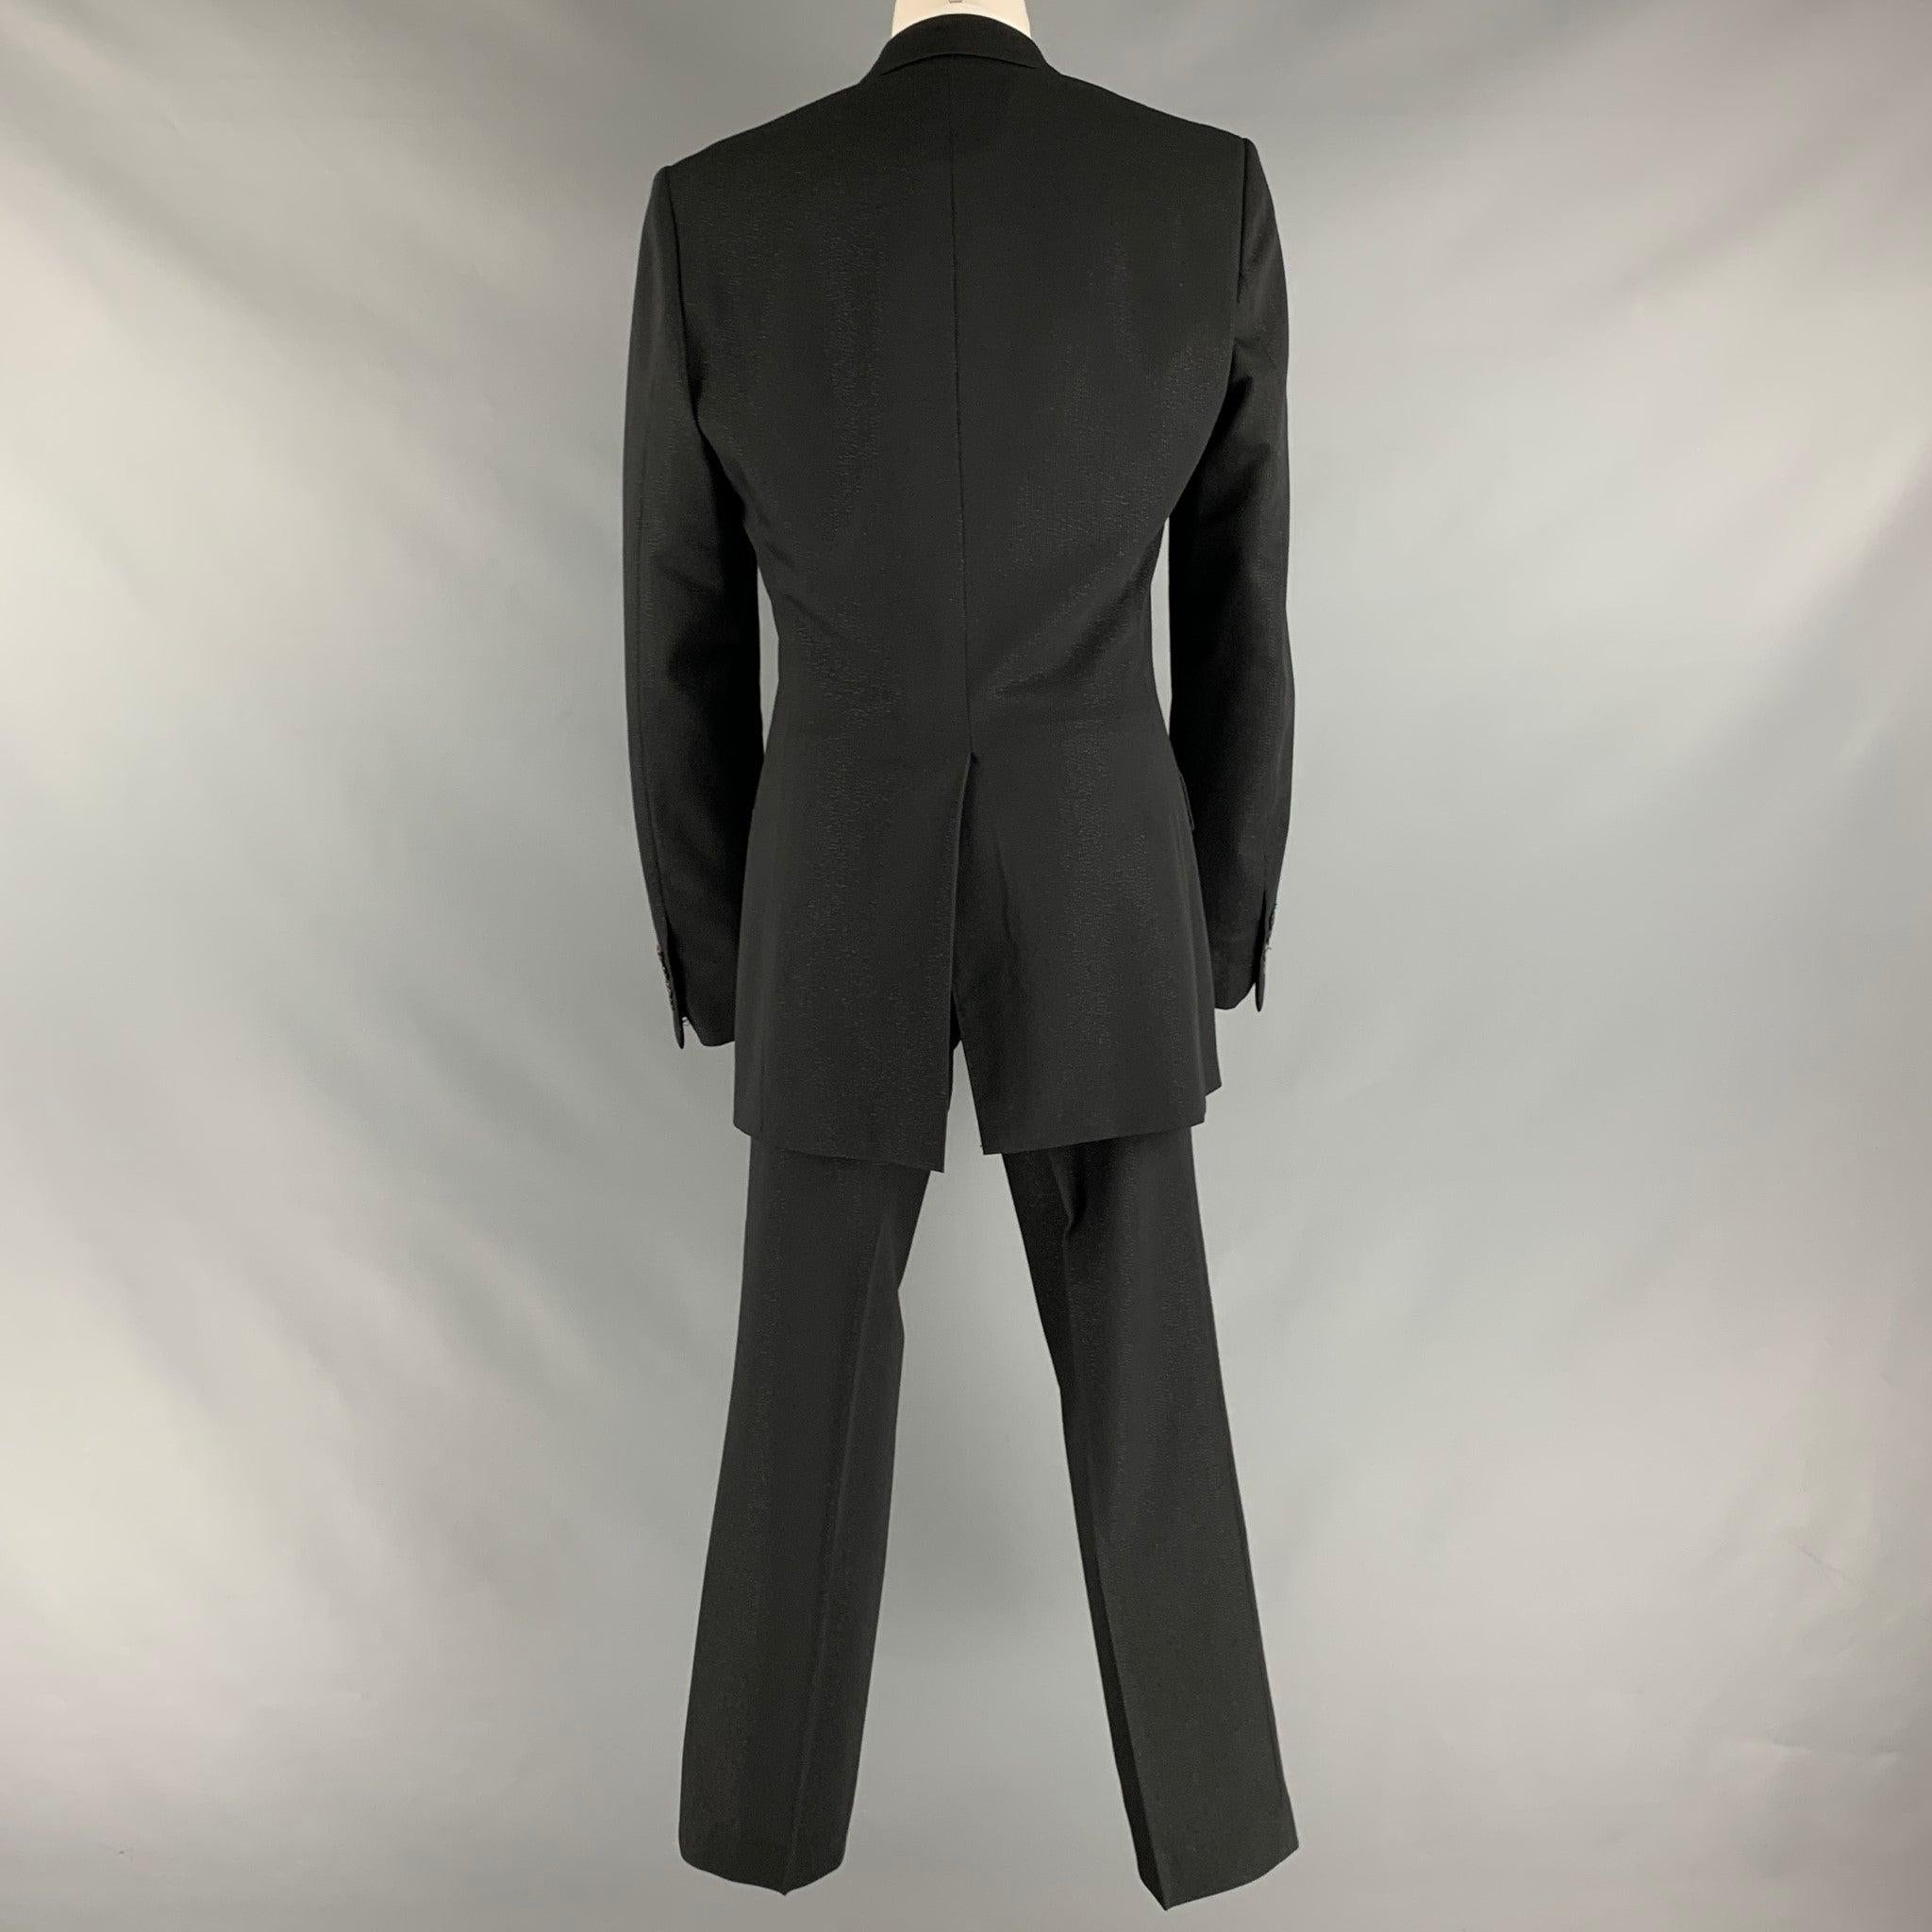 CHRISTIAN DIOR Size 36 Black Silver Shimmery Polyester Blend Suit For Sale 1